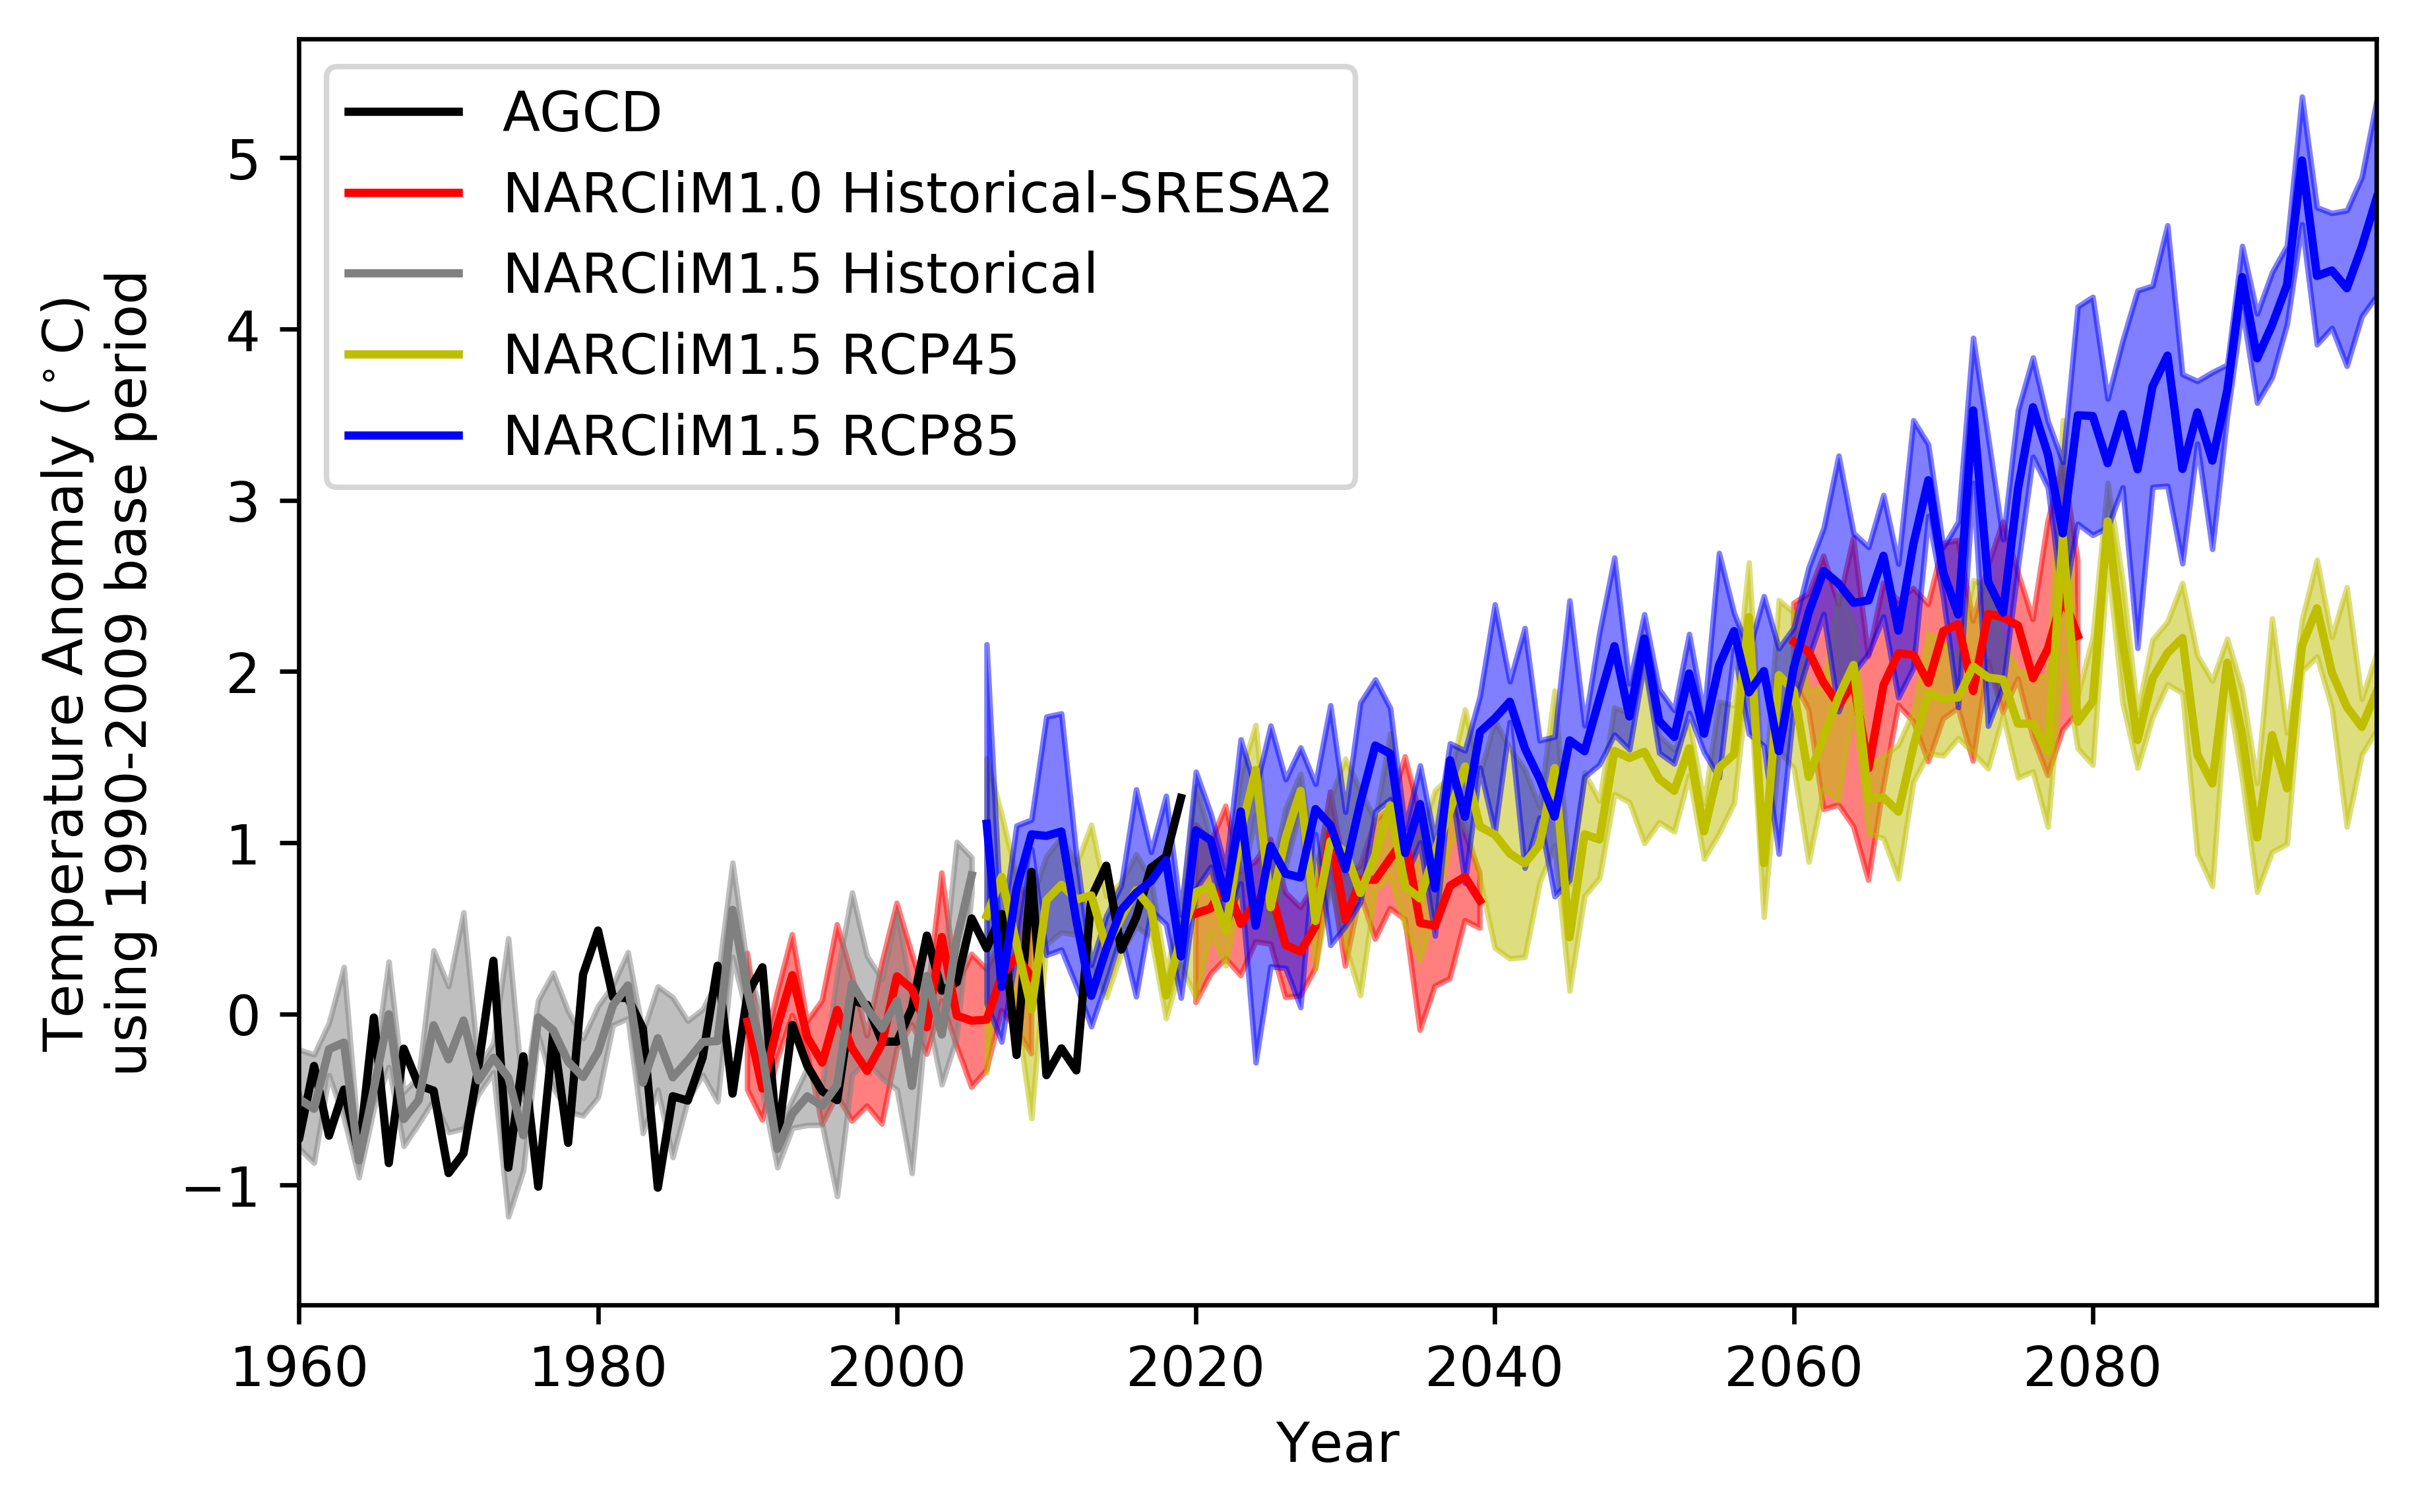 Observed and projected changes in temperature in NSW and the ACT from 1960–2080. Black, red, grey, green and blue lines denote observation of AGCD data from http://www.bom.gov.au/climate/austmaps/about-agcd-maps.shtml0 (black line) and the following simulations: NARCliM1.0 historical and SRES-A2 (red line), NARCliM1.5 historical (grey line), NARCliM1.5 RCP4.5 (green line) and NARCliM1.5 RCP8.5 (blue line). Temperature differences are measured against the 1990–2009 base period. Temperature is measured in deg